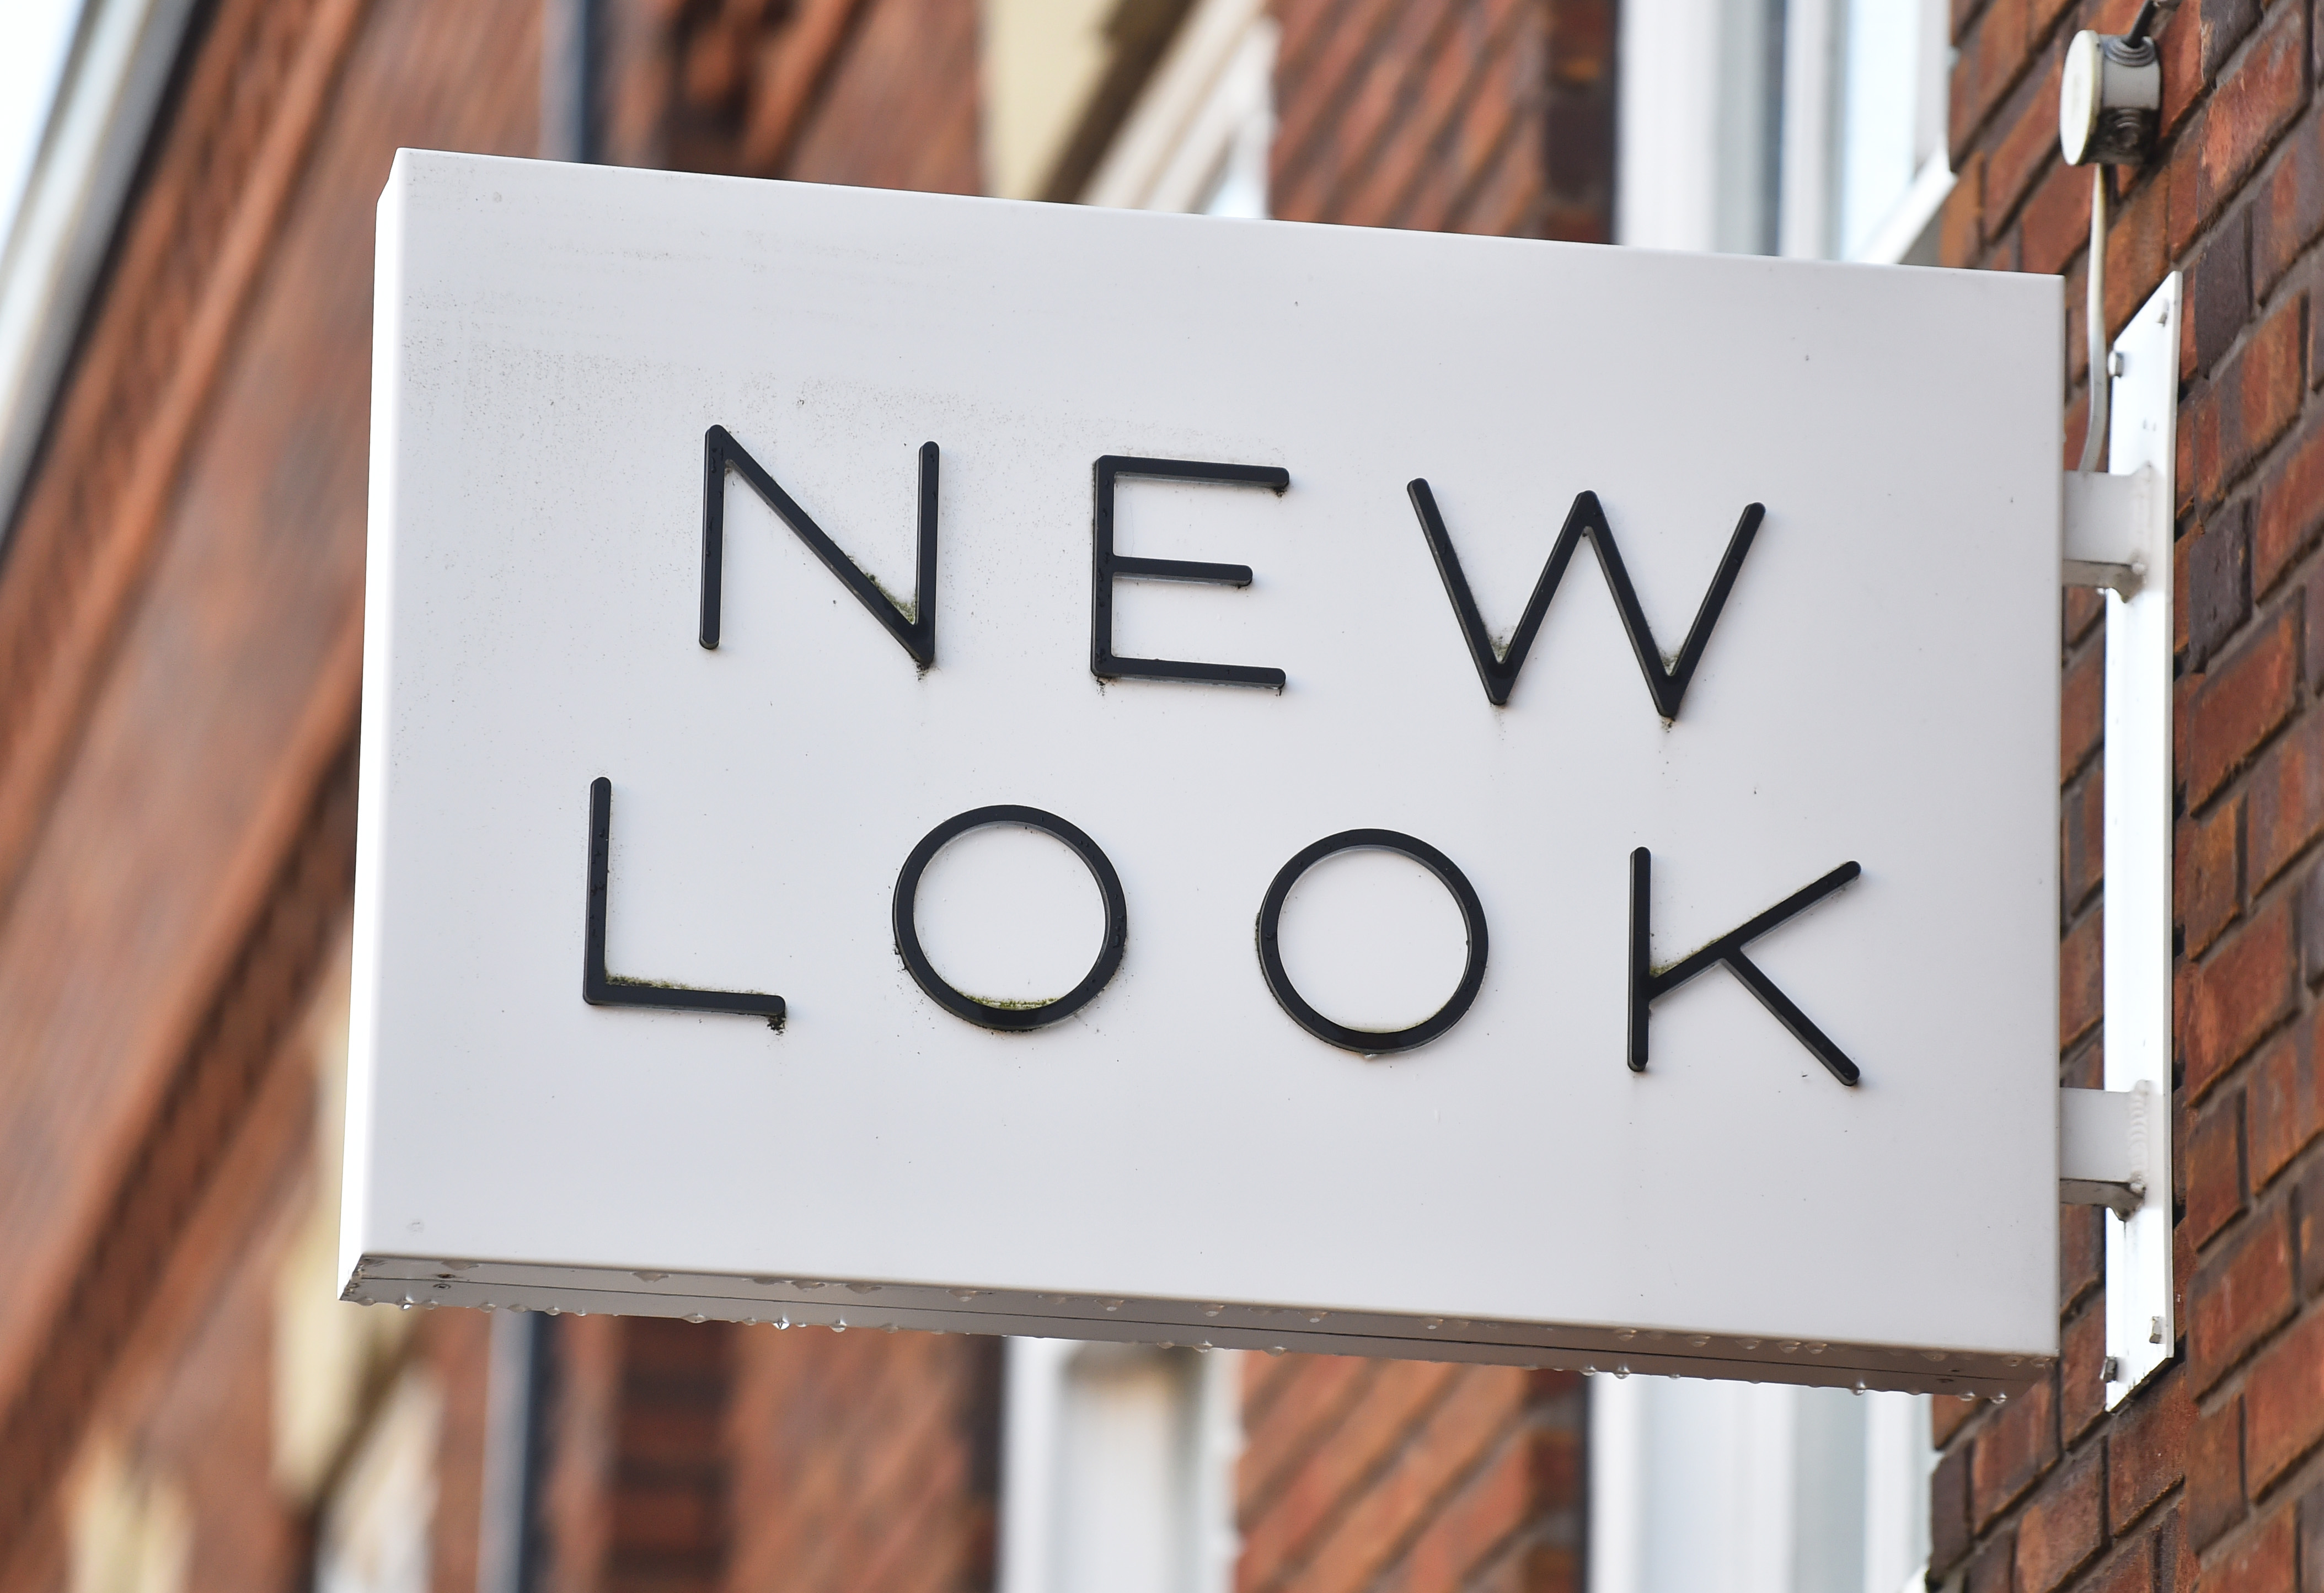 The branch of New Look in Shirley, Southampton, is closing its doors for the last time today